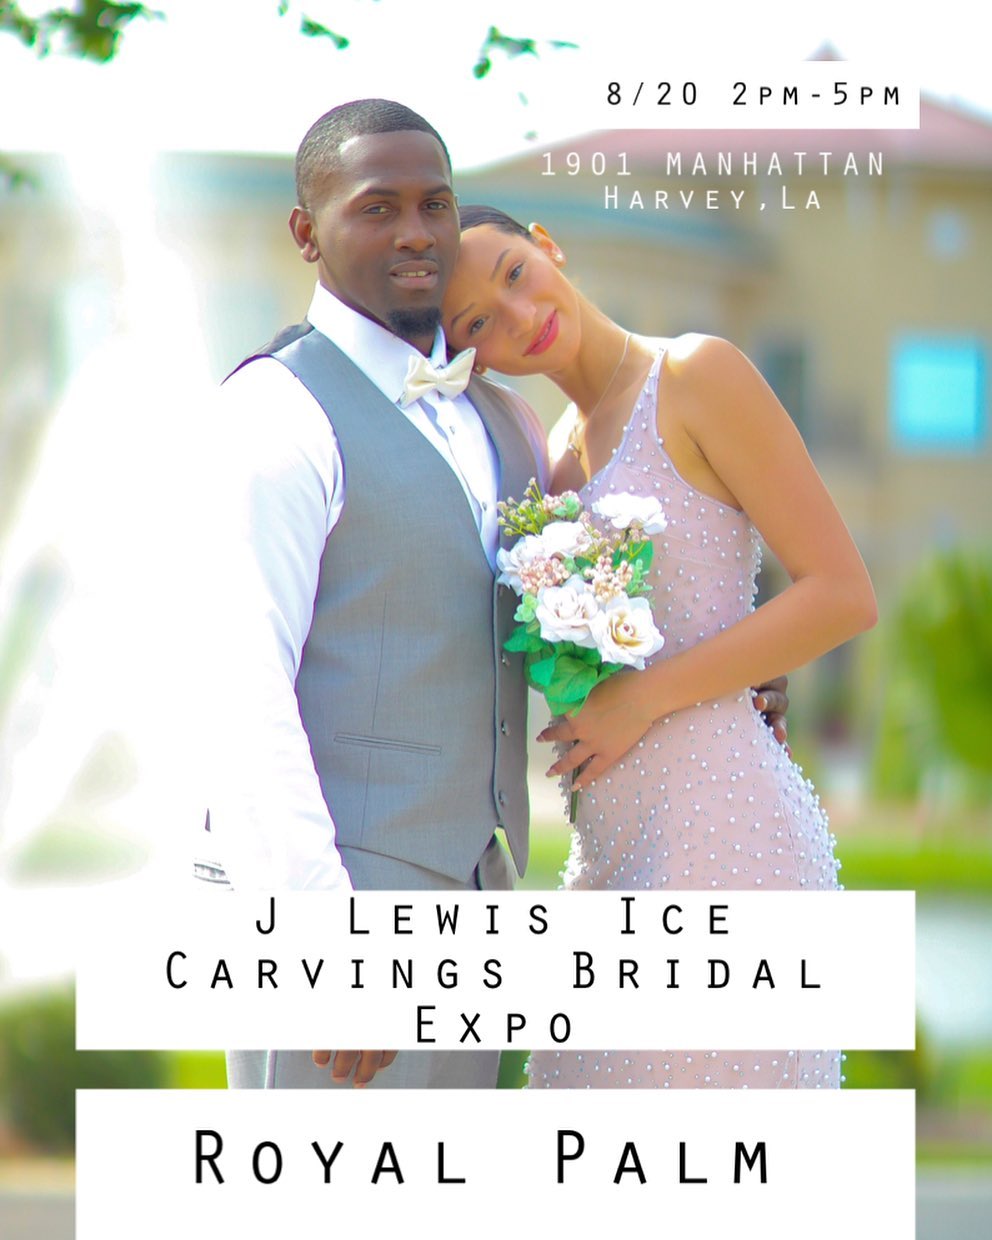 J Lewis Ice Carvings Bridal Expo August 20, 2023 at Royal Palm in Harvey La